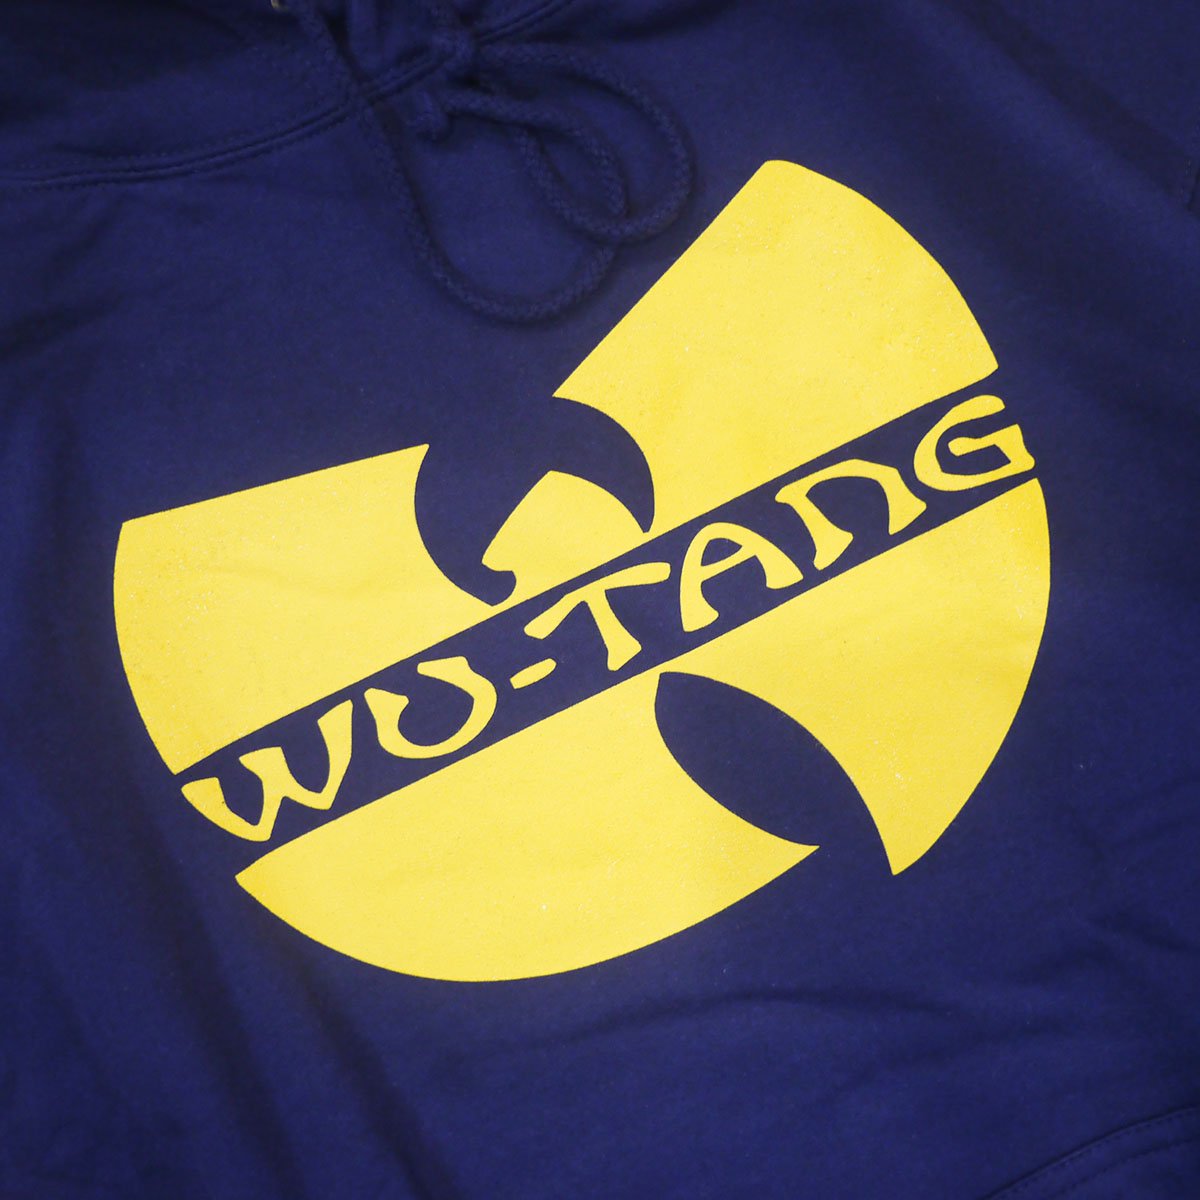 Fedup | HIPHOP WEAR | <img class='new_mark_img1' src='https://img.shop-pro.jp/img/new/icons30.gif' style='border:none;display:inline;margin:0px;padding:0px;width:auto;' />WU Tang Clan 